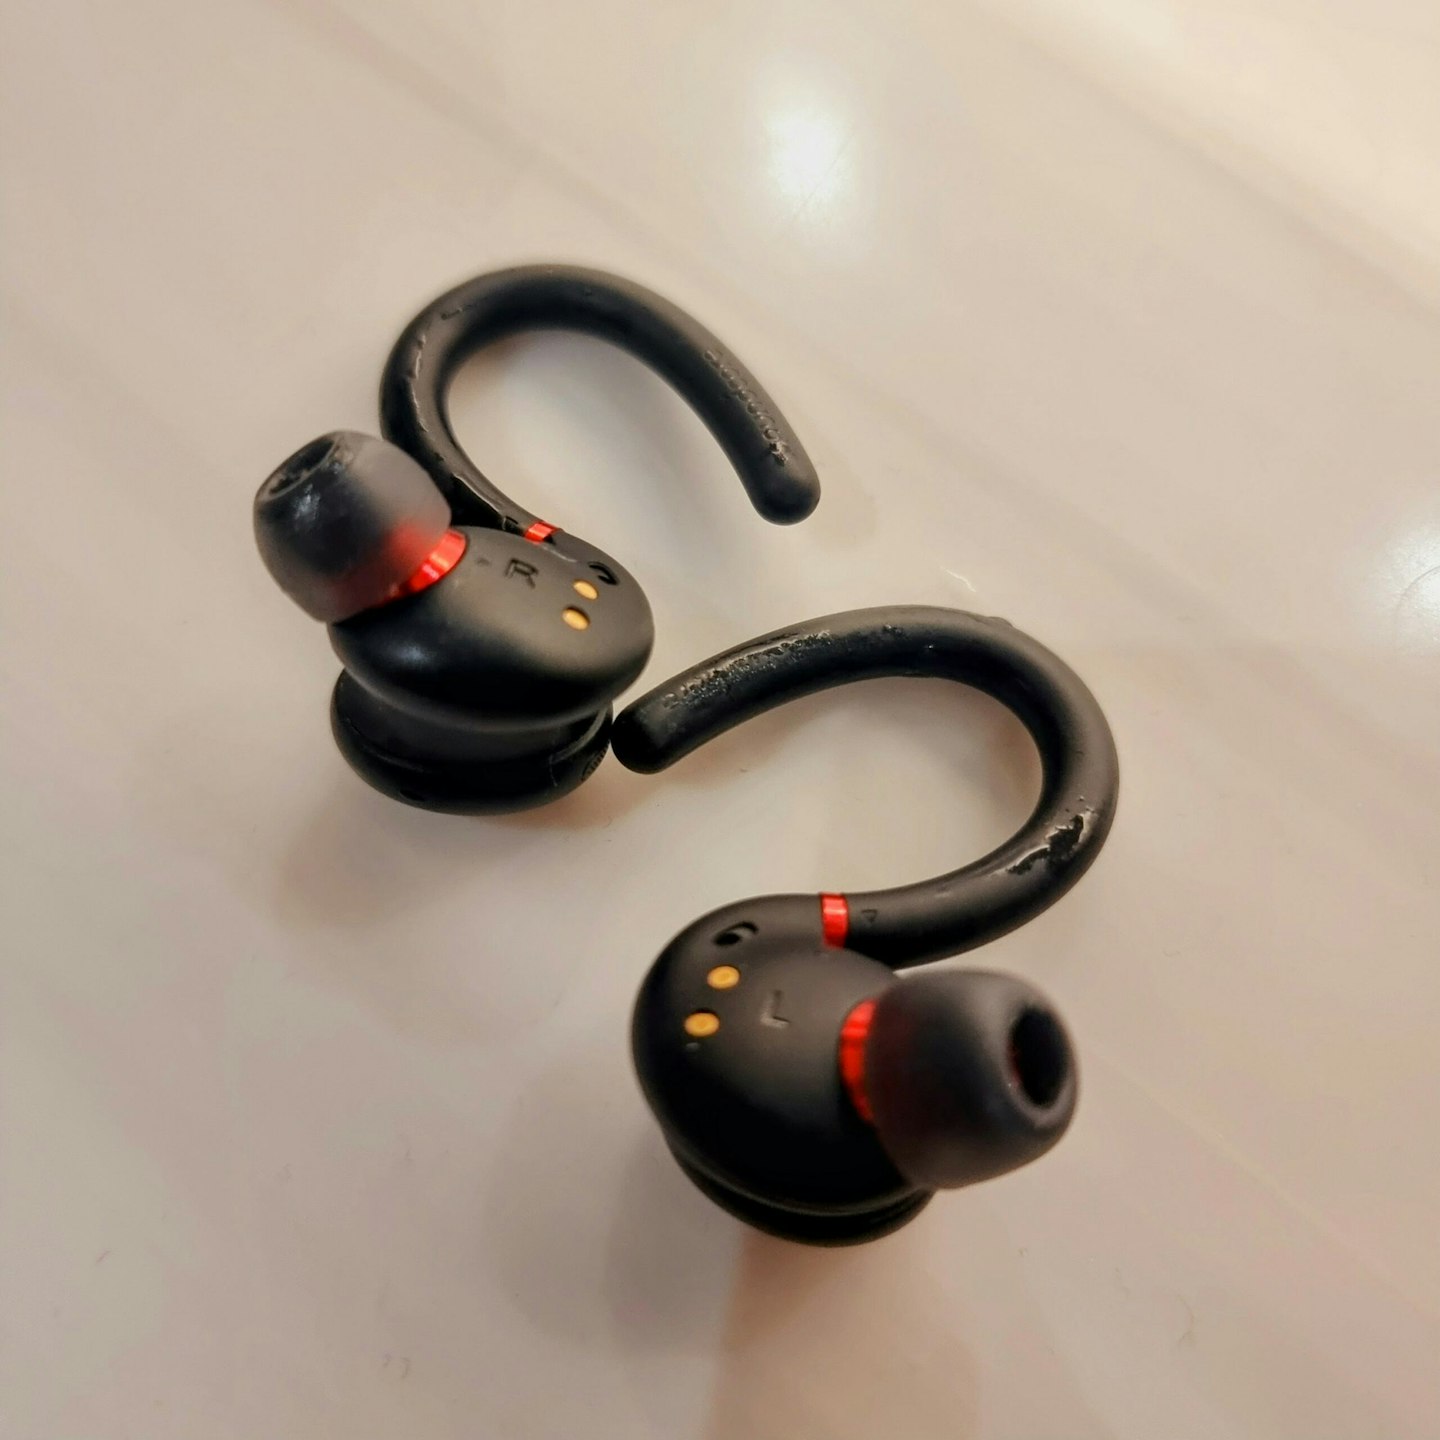 Soundcore Anker Sport earbuds on a hard surface with moisture on the surface